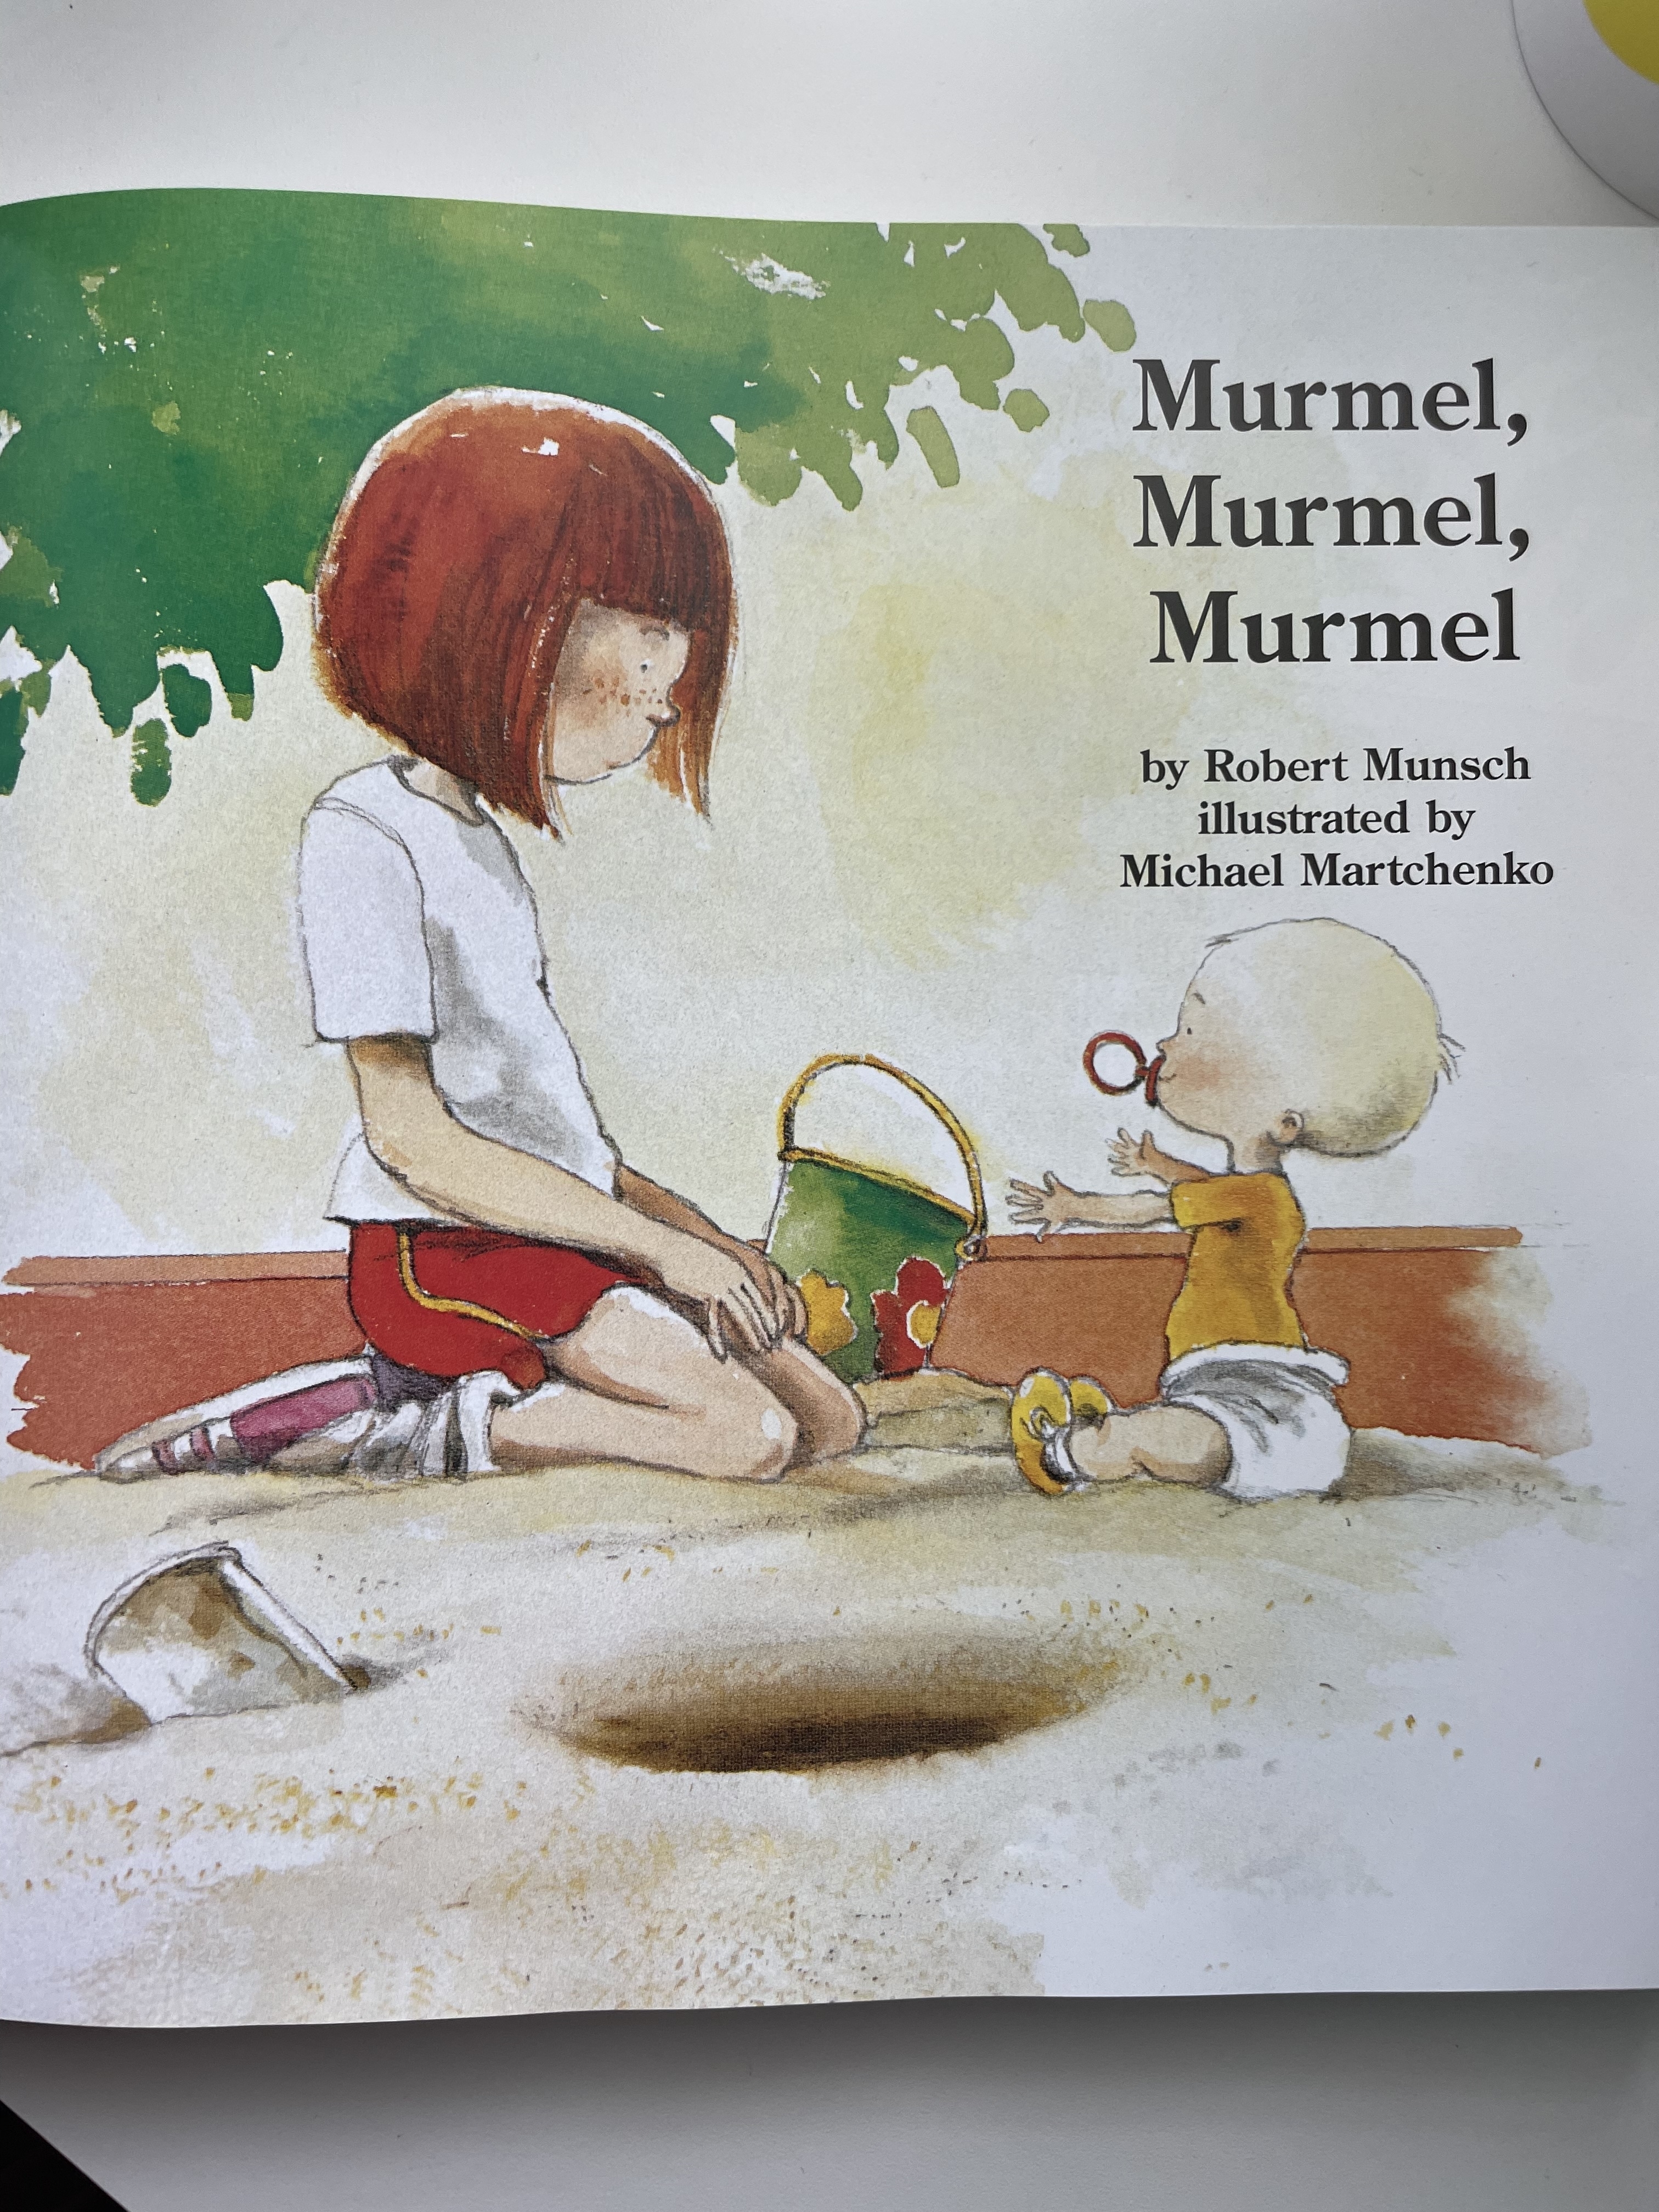 Illustration from &quot;Murmel, Murmel&quot; showing a girl sitting on the ground next to a baby who is holding a sand pail